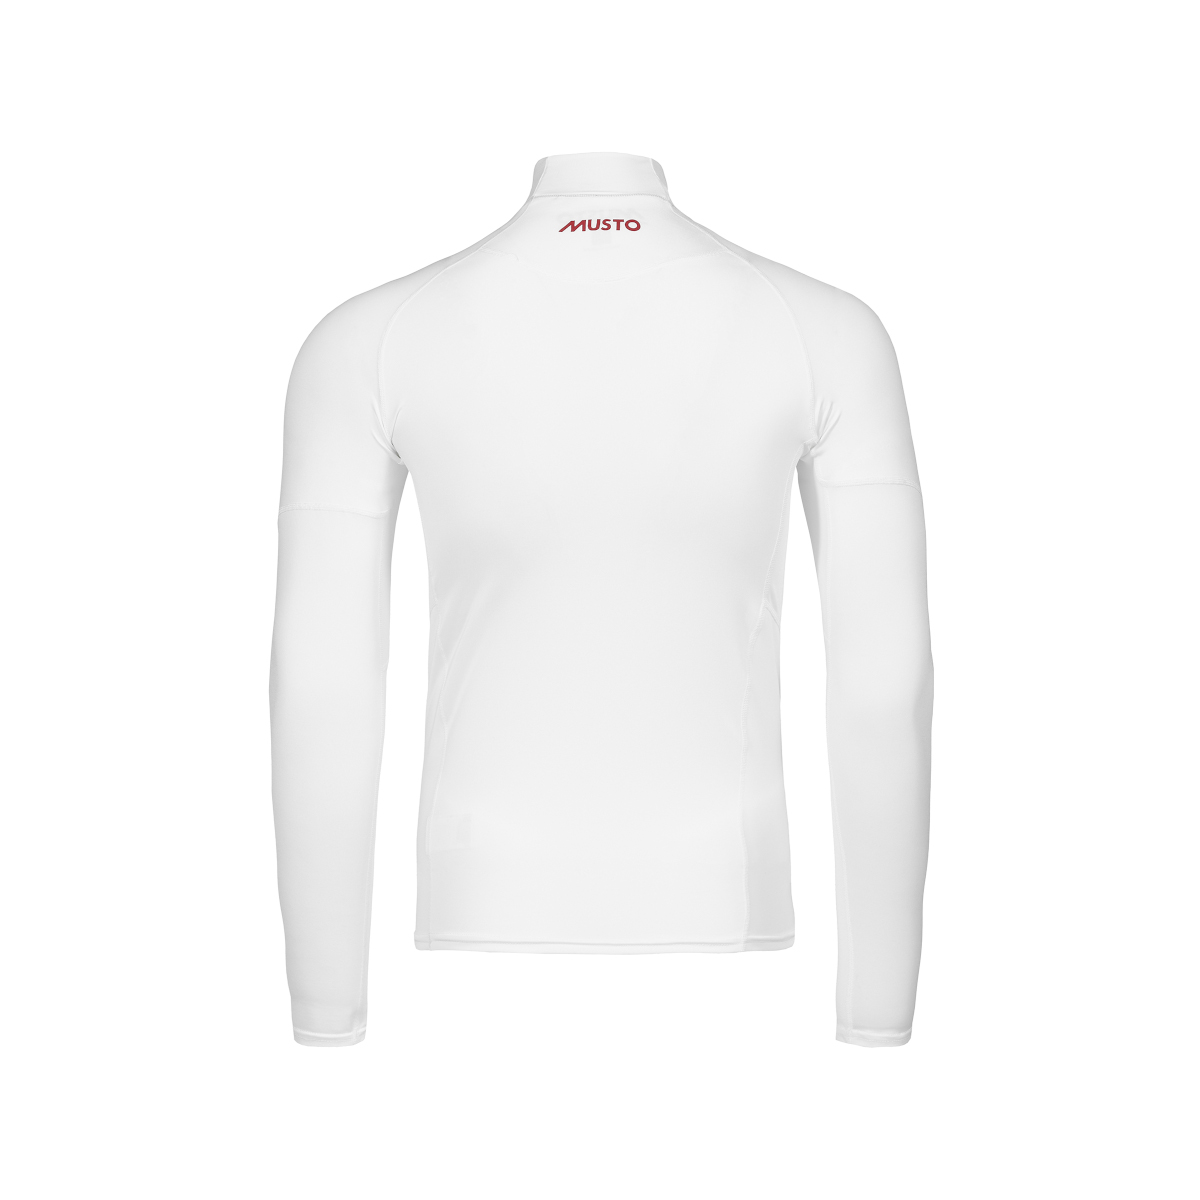 Musto Championship Rash Guard manches longues homme blanc, taille M